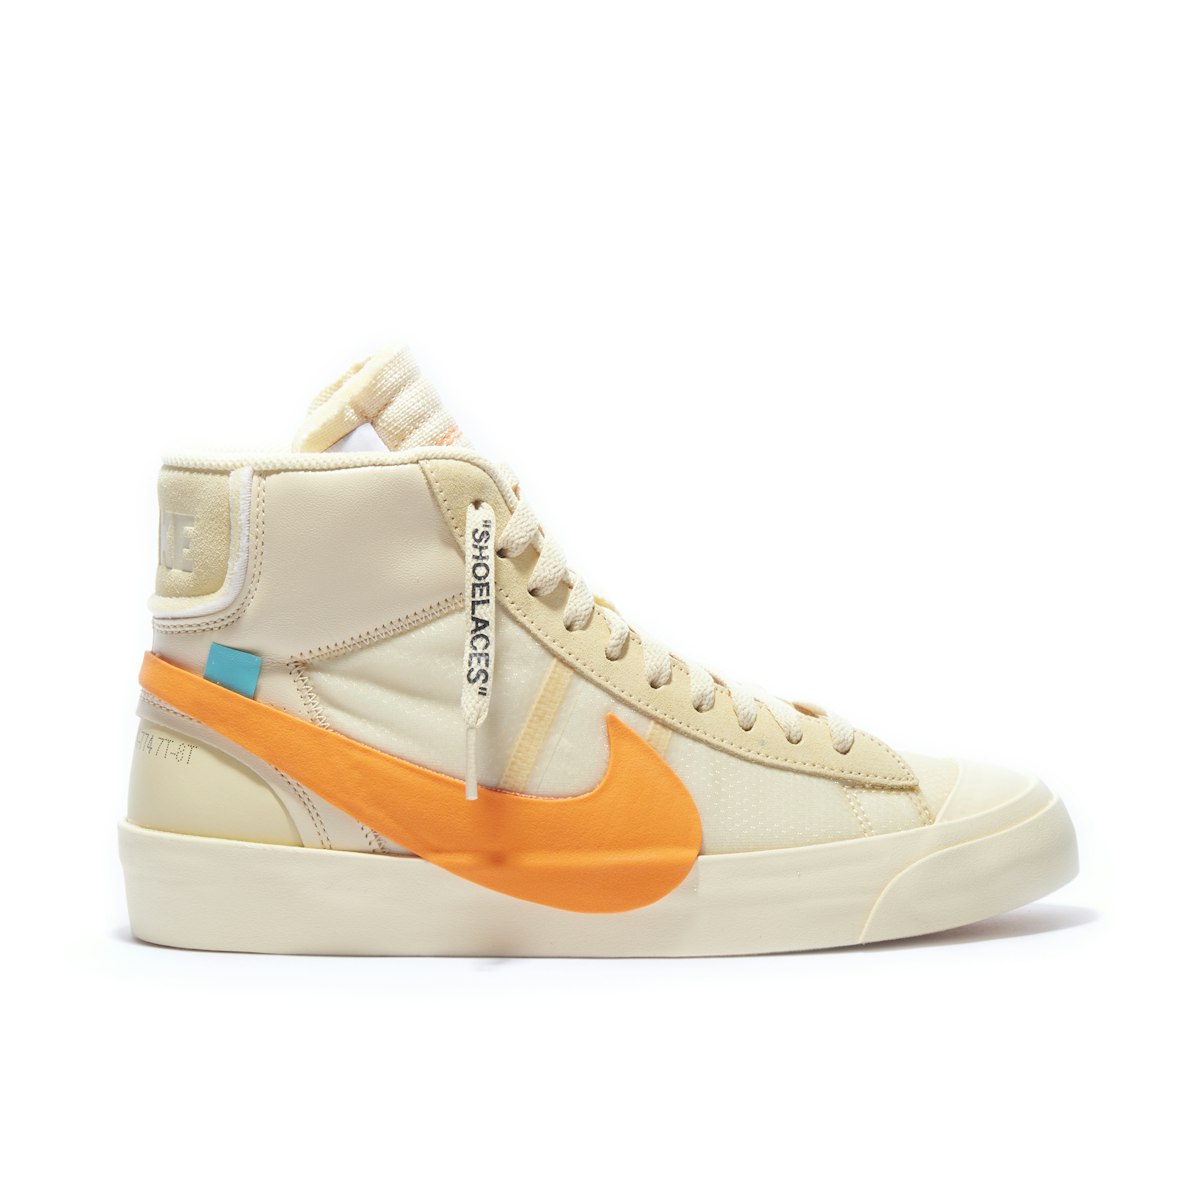 Blazer All Eve x Off-White | AA3832-700 | Laced